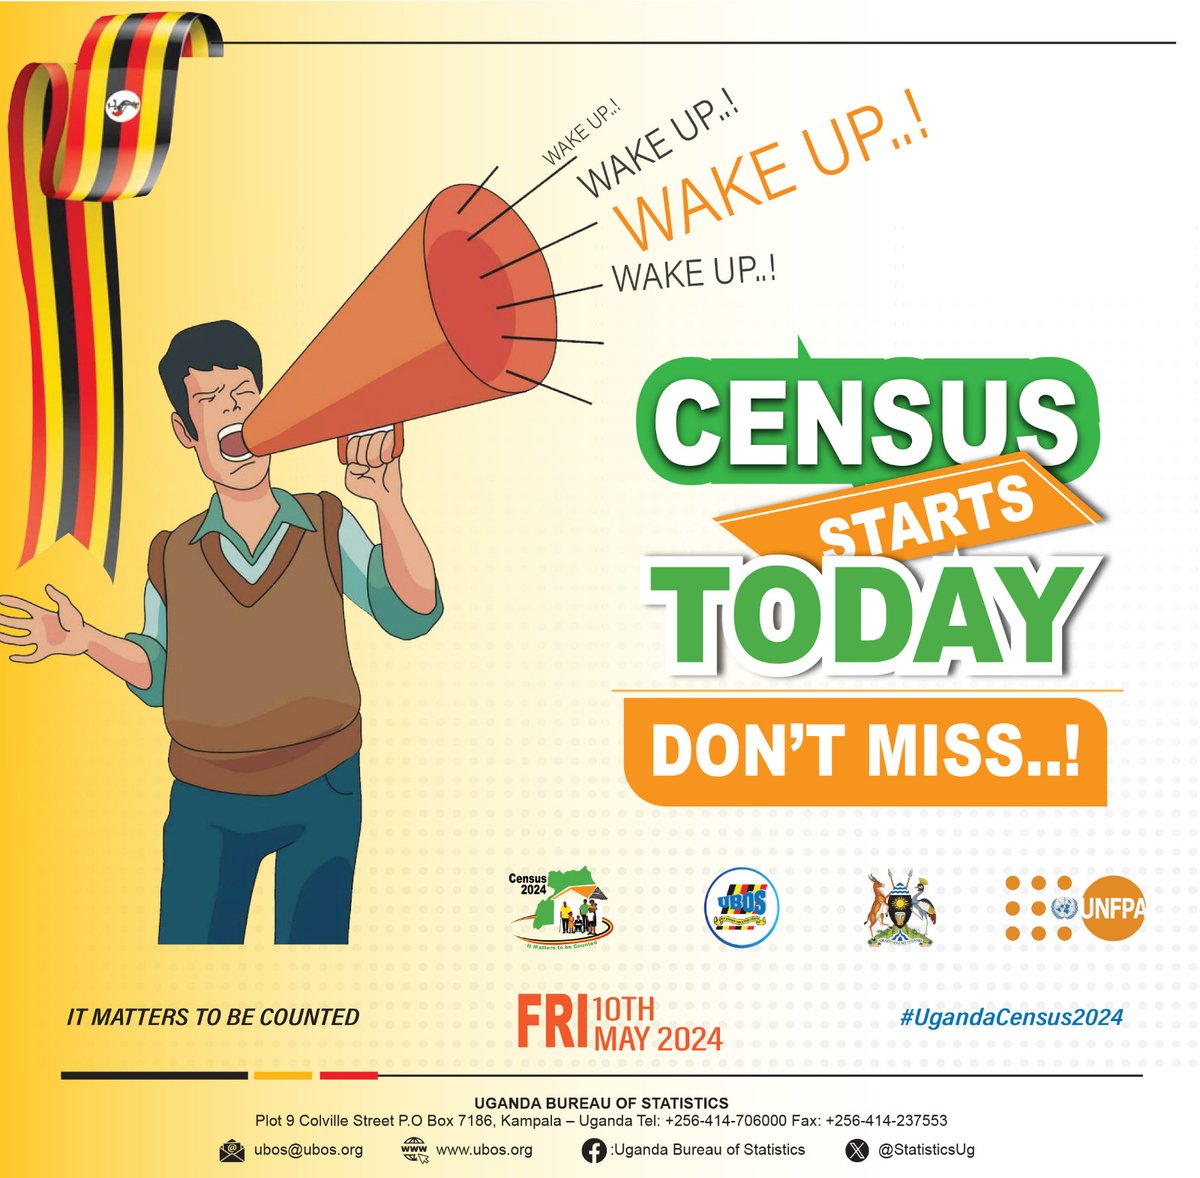 📢Good morning Uganda! 🇺🇬 It's time to rise to the occasion. Today is the day we've all been waiting for - the Census day. It's important to stay in your homes and engage in the census process. The Census is scheduled to take place from May 10th to 19th, 2024. #Ugandacensus2024…